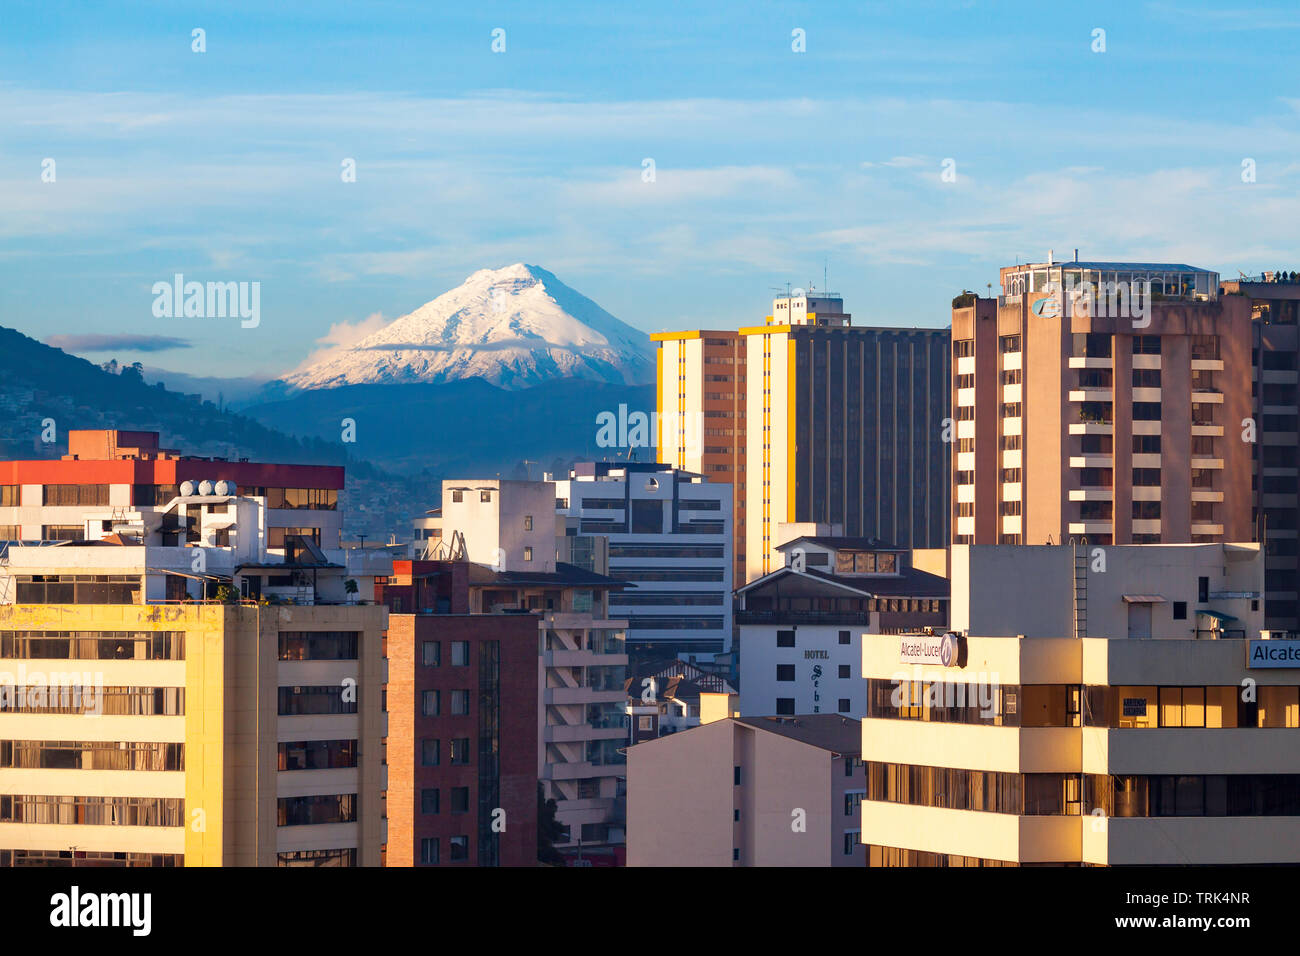 Cotopaxi is an active stratovolcano in the Andes Mountains, located in the Latacunga canton of Cotopaxi Province. This image was shot from the city of Stock Photo